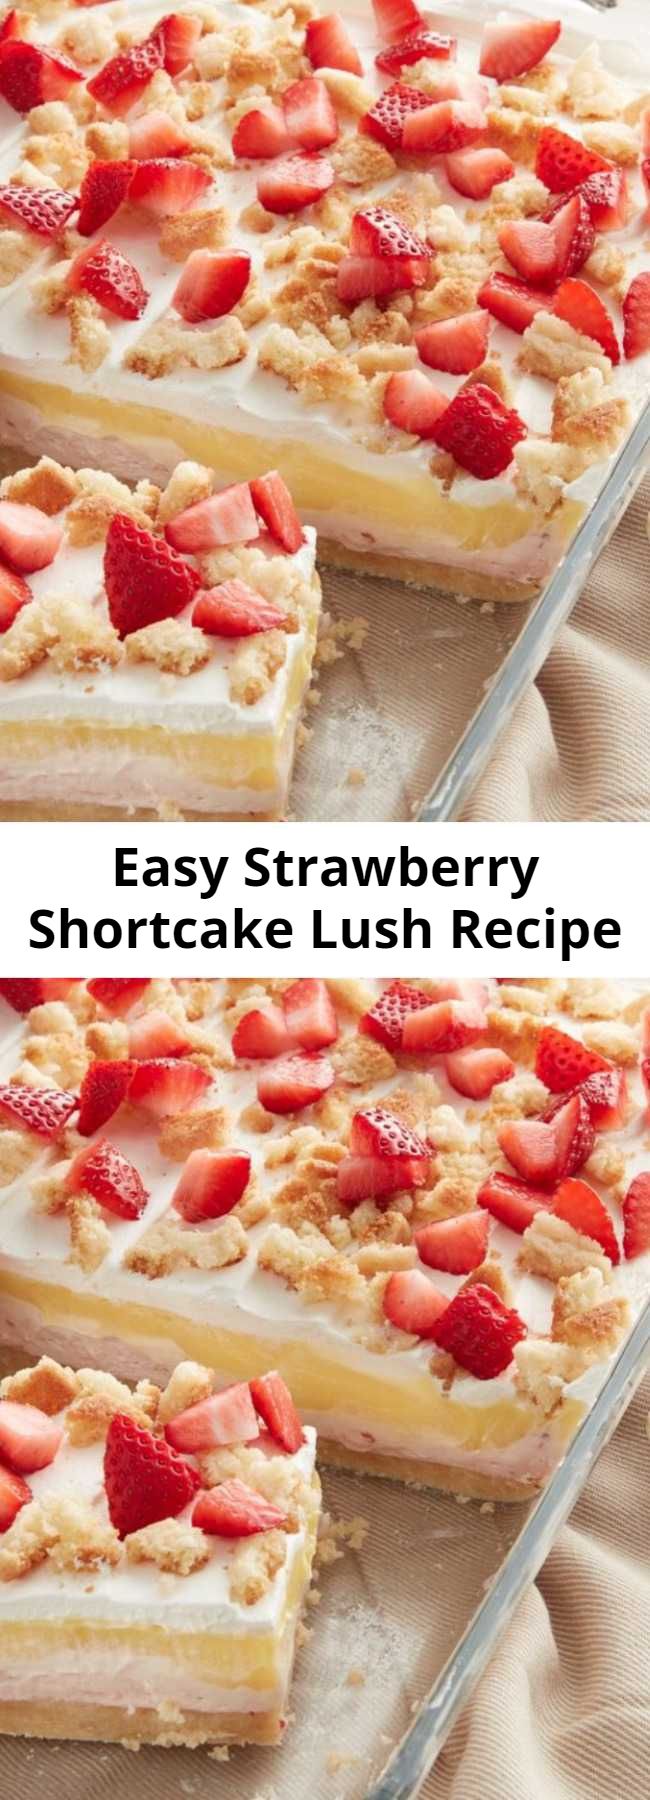 Easy Strawberry Shortcake Lush Recipe - Strawberry shortcake gets a fun makeover that's perfect for sharing with a crowd. With a sugar cookie crust, cool layers of sweet strawberry cream cheese, vanilla pudding and whipped topping, plus a finishing sprinkle of fresh strawberries, it's summer in a dessert! #dessert #summer